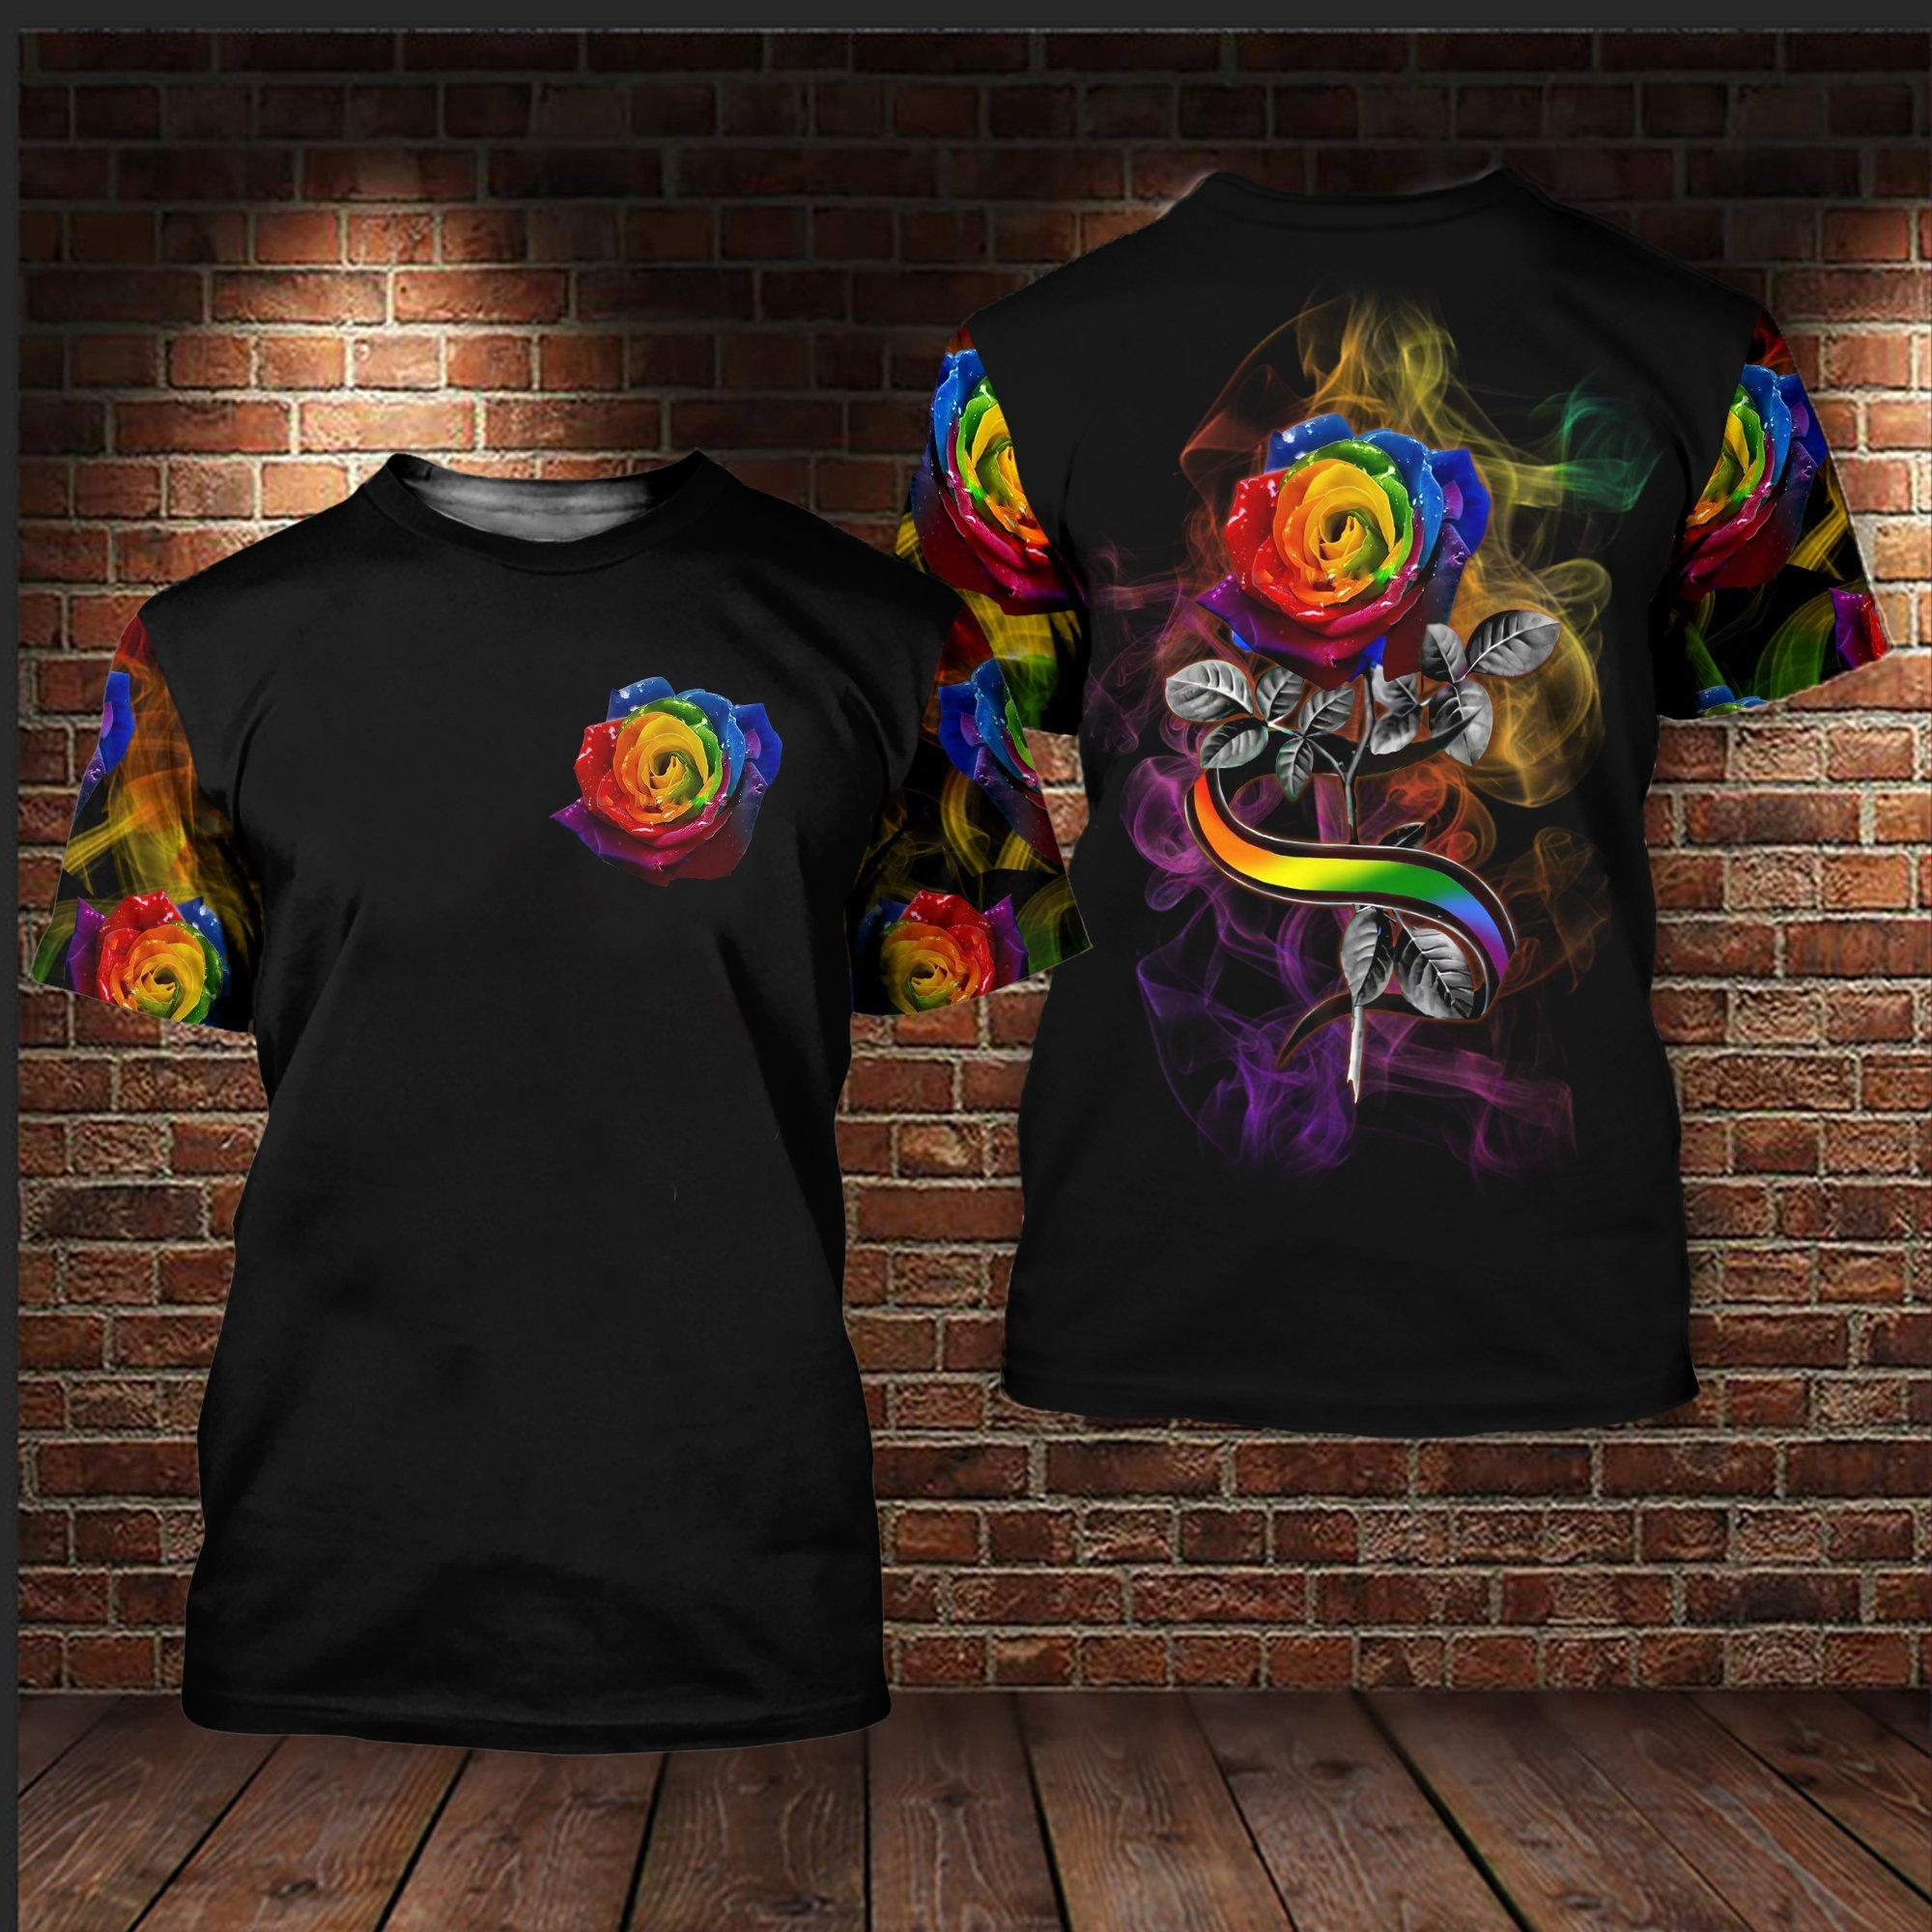 LGBT Rose Angel Wing 3D All Over Printed Shirts For LGBT Community/ Bisexual Shirts For LGBTQ History Month